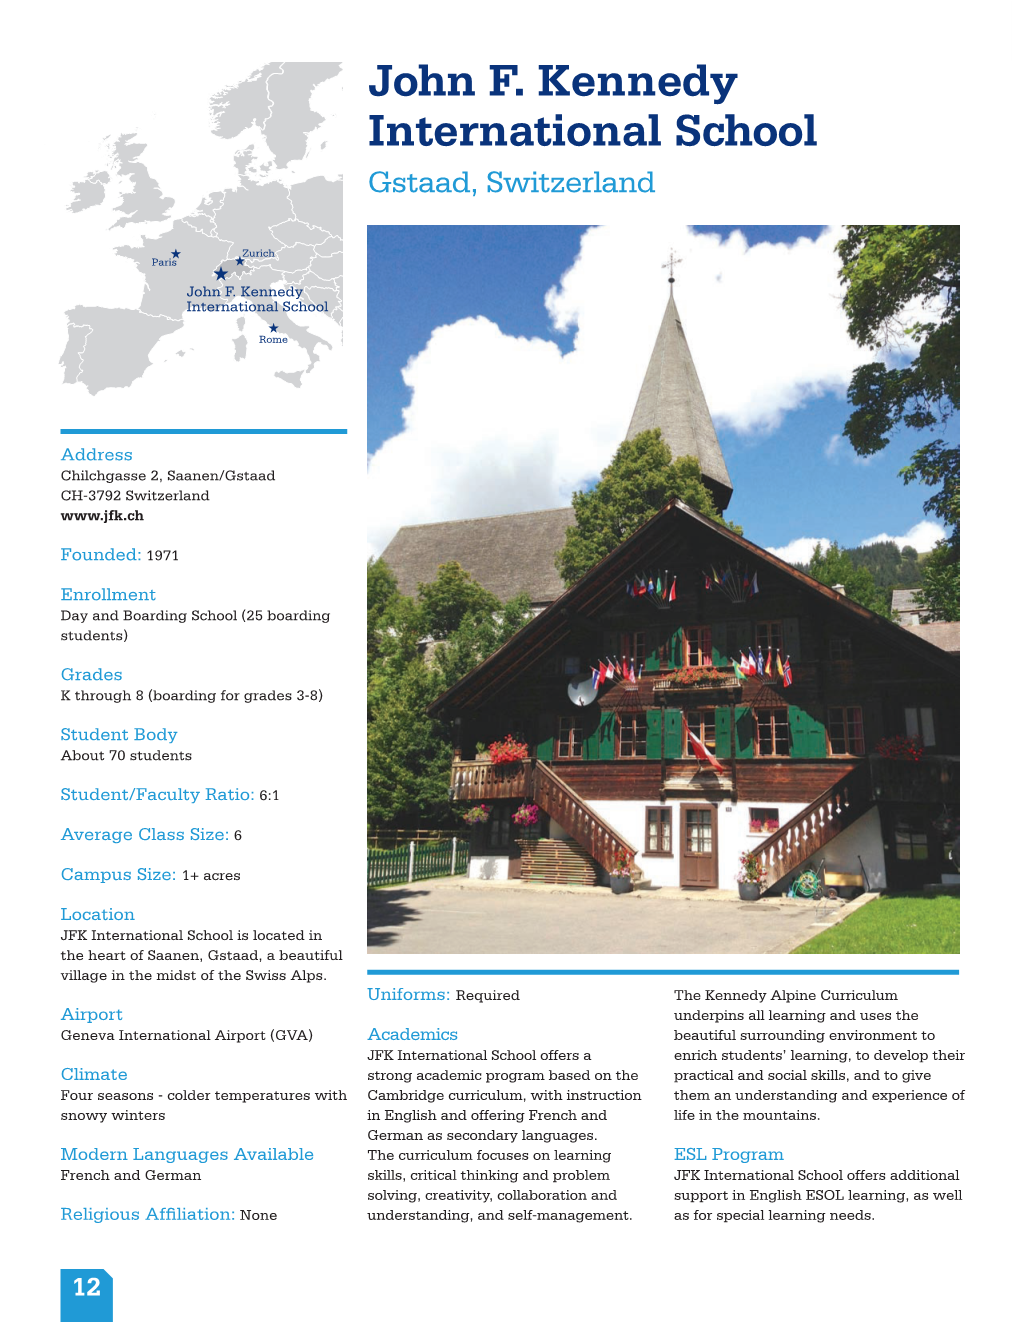 JFK International School Is Located in the Heart of Saanen, Gstaad, a Beautiful Village in the Midst of the Swiss Alps